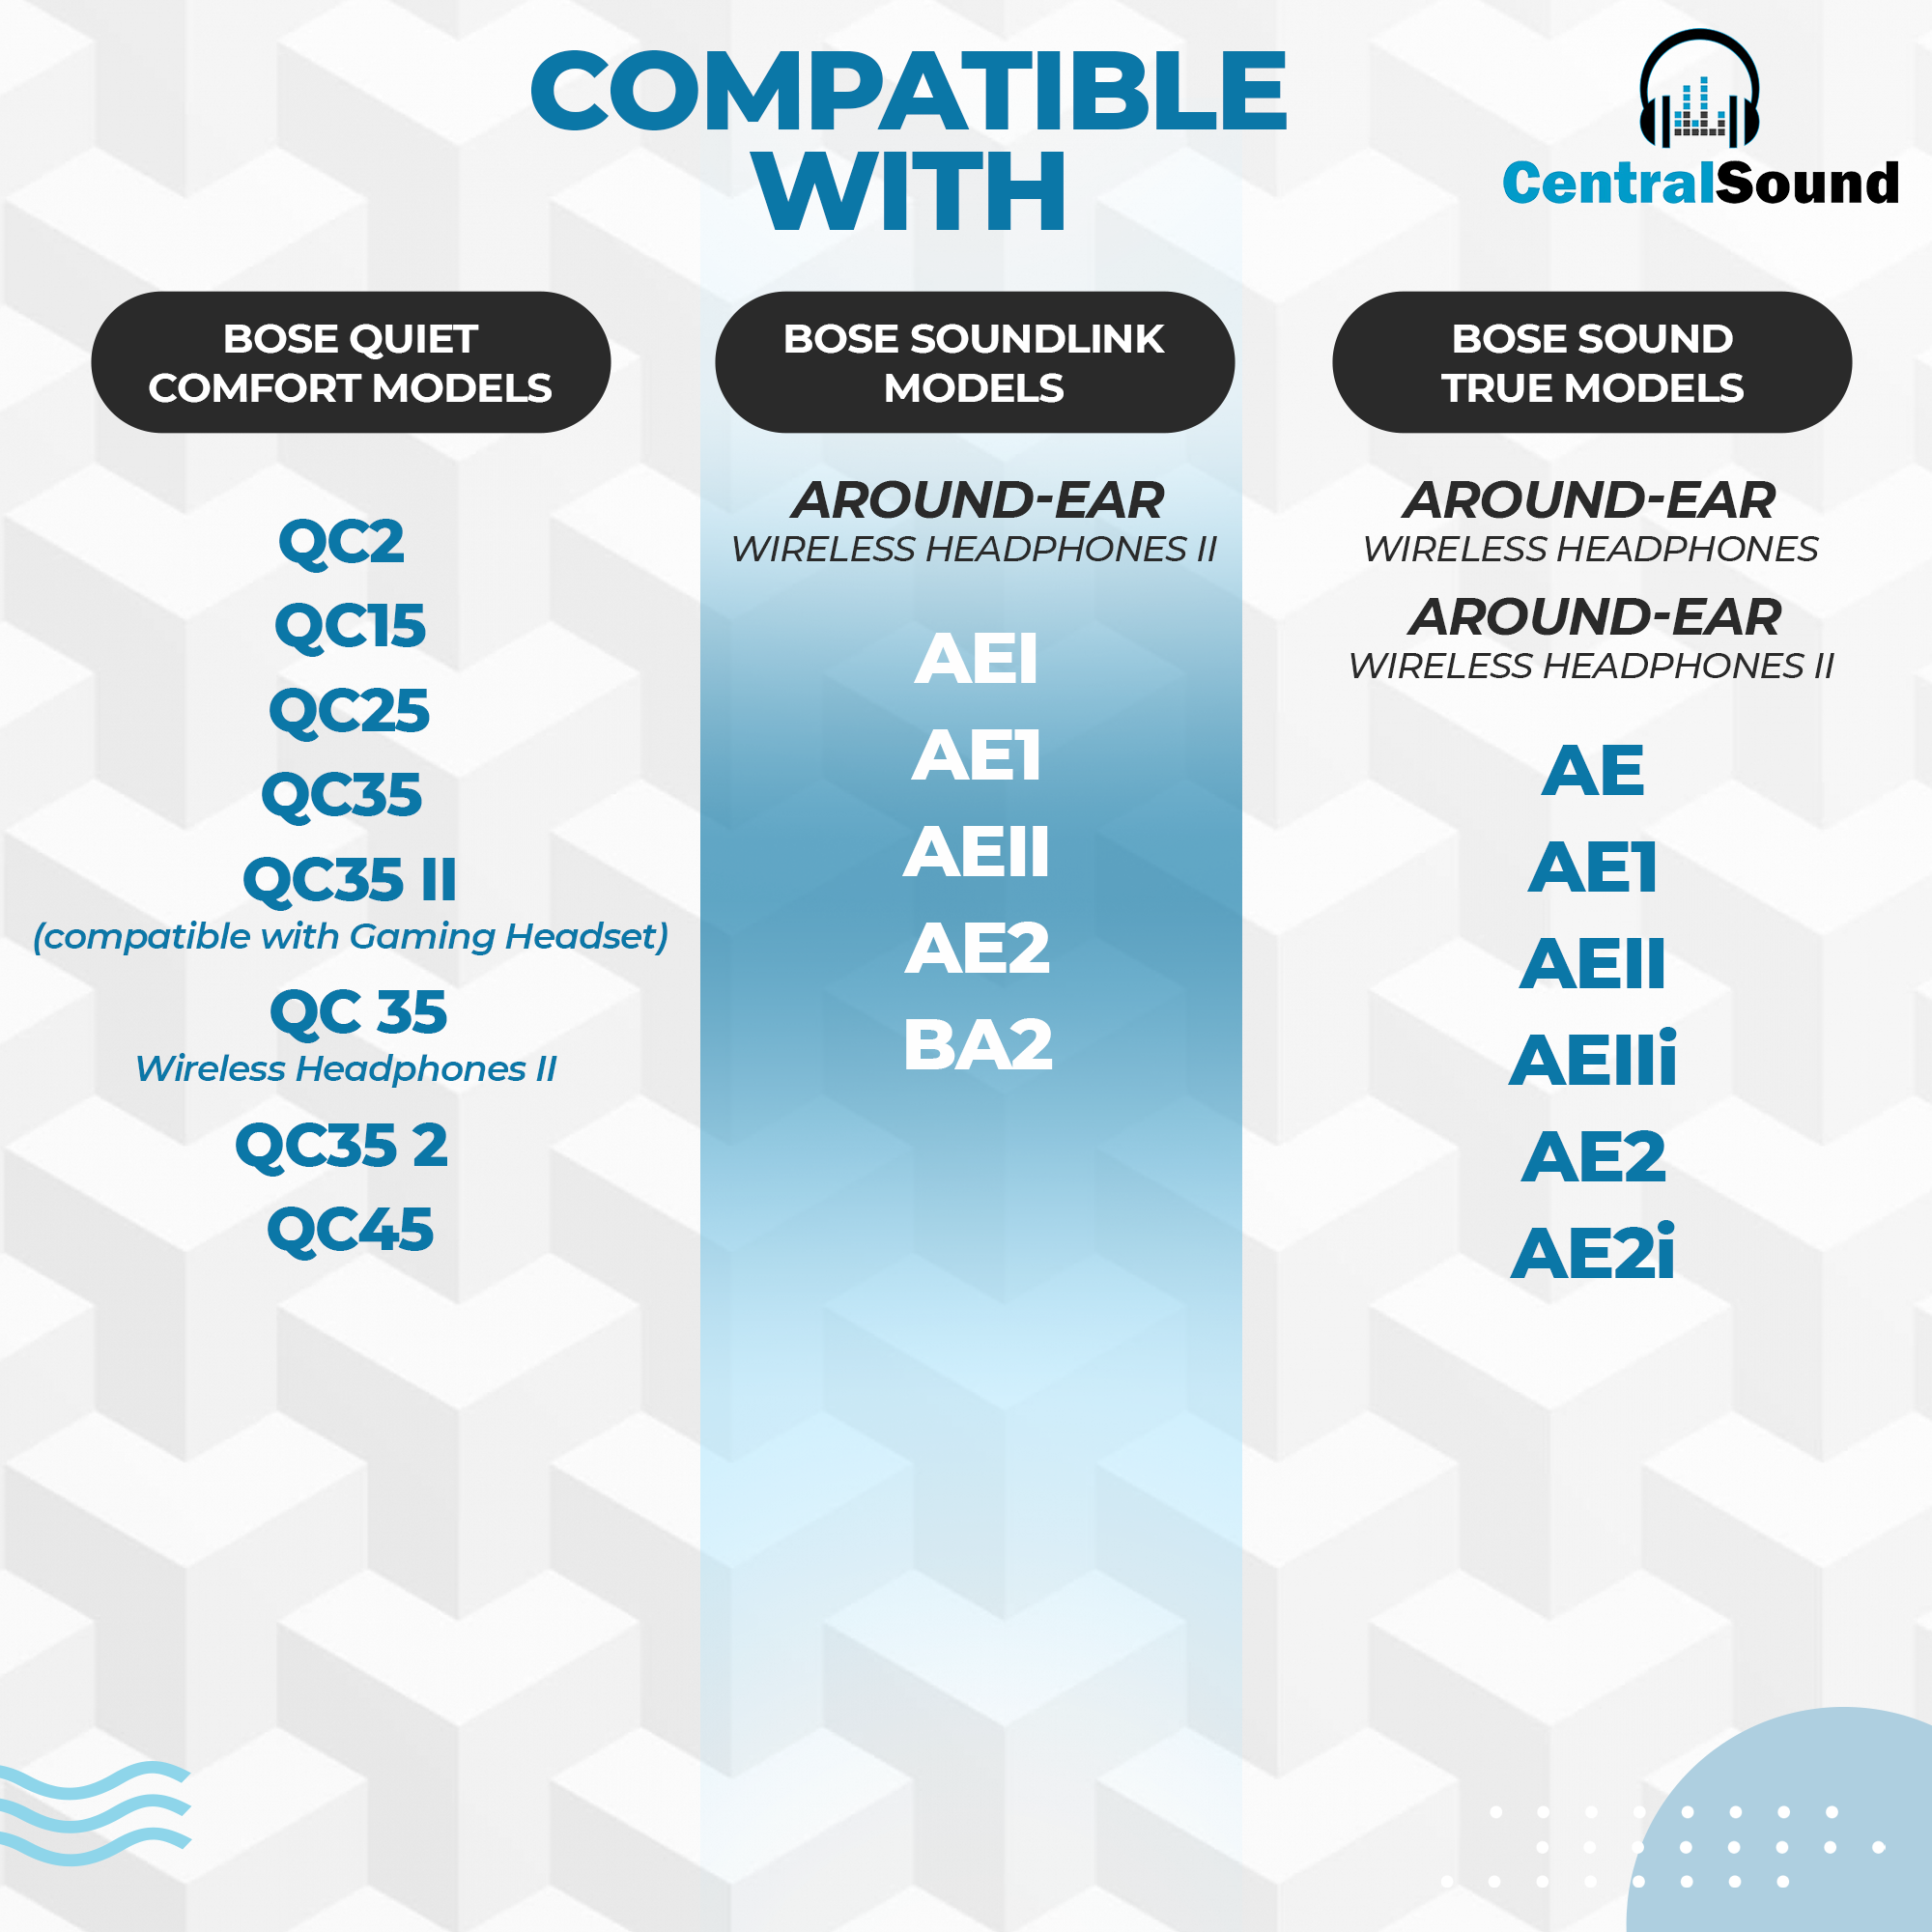 CentralSound Coolers Bose SoundTrue Around-Ear Wireless II AE1 AE2 AEII AEIIi AE2i Cooling Gel Ear Pad Replacement Cushions with Memory Foam - CentralSound